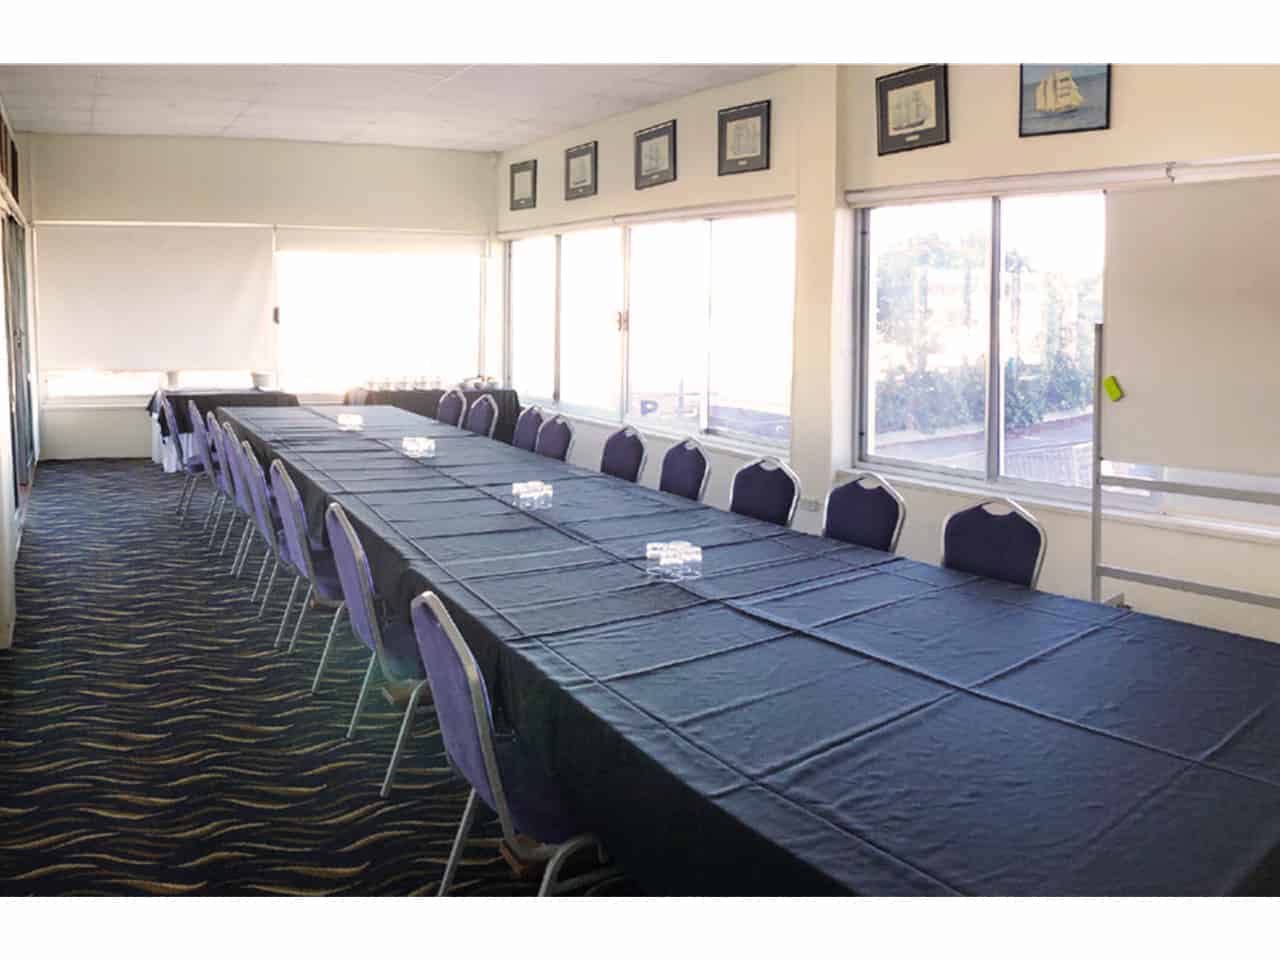 Boardroom event space